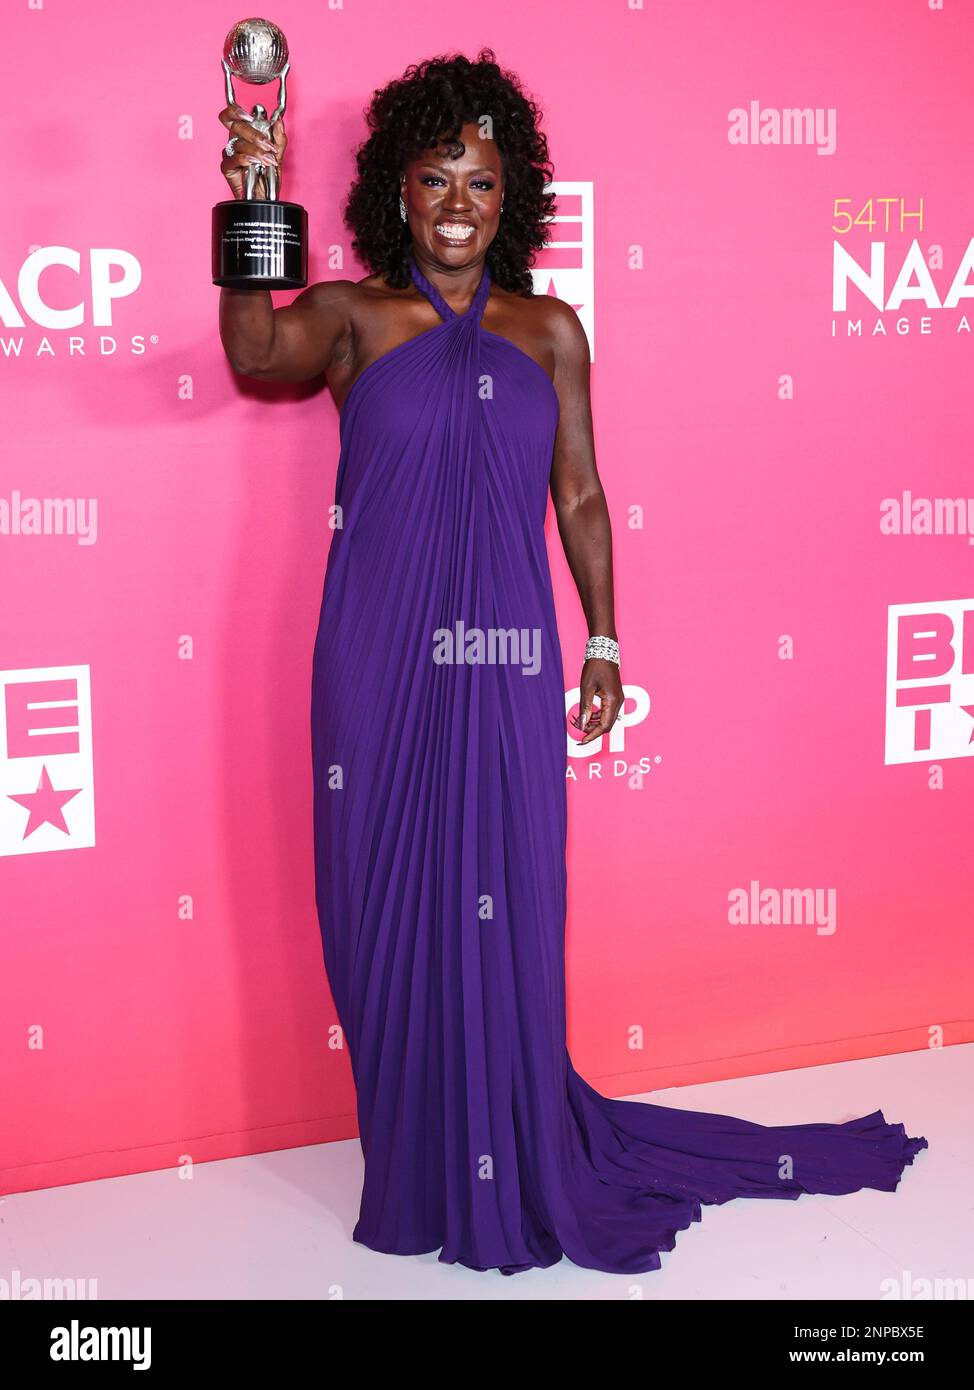 PASADENA, LOS ANGELES, CALIFORNIA, USA - FEBRUARY 25: American actress Viola Davis, winner of the Outstanding Actress in a Motion Picture award for 'The Woman King' and the Outstanding Literary Work - Nonfiction award for 'Finding Me' wearing custom Christian Dior and DeBeers jewelry and carrying Rodo poses in the press room at the 54th Annual NAACP Image Awards held at the Pasadena Civic Auditorium on February 25, 2023 in Pasadena, Los Angeles, California, United States. (Photo by Xavier Collin/Image Press Agency) Stock Photo